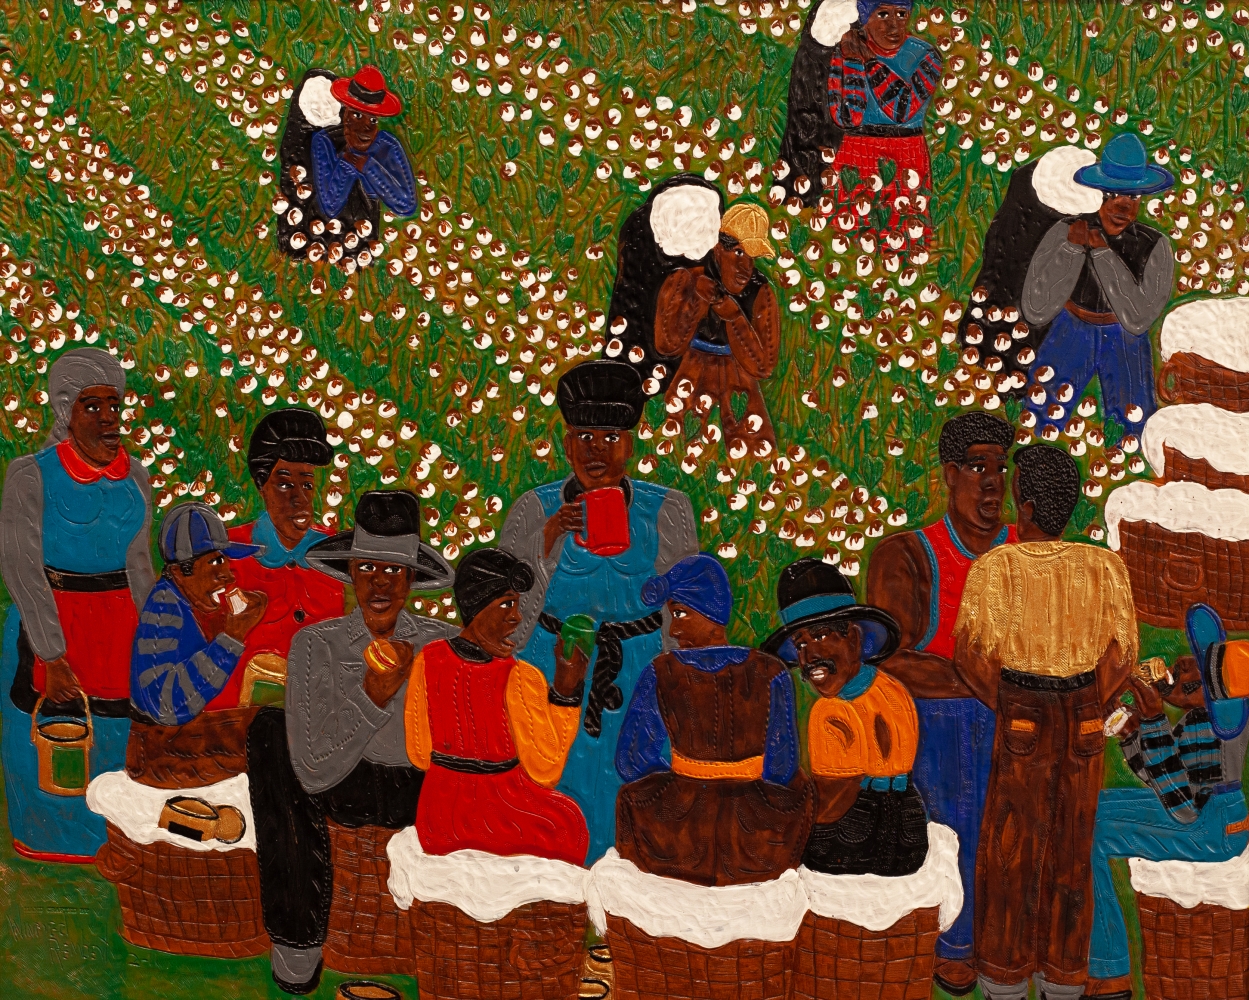 Dinnertime in the Cotton Field, 2011
Dye on carved and tooled leather
26 x 31.5 inches